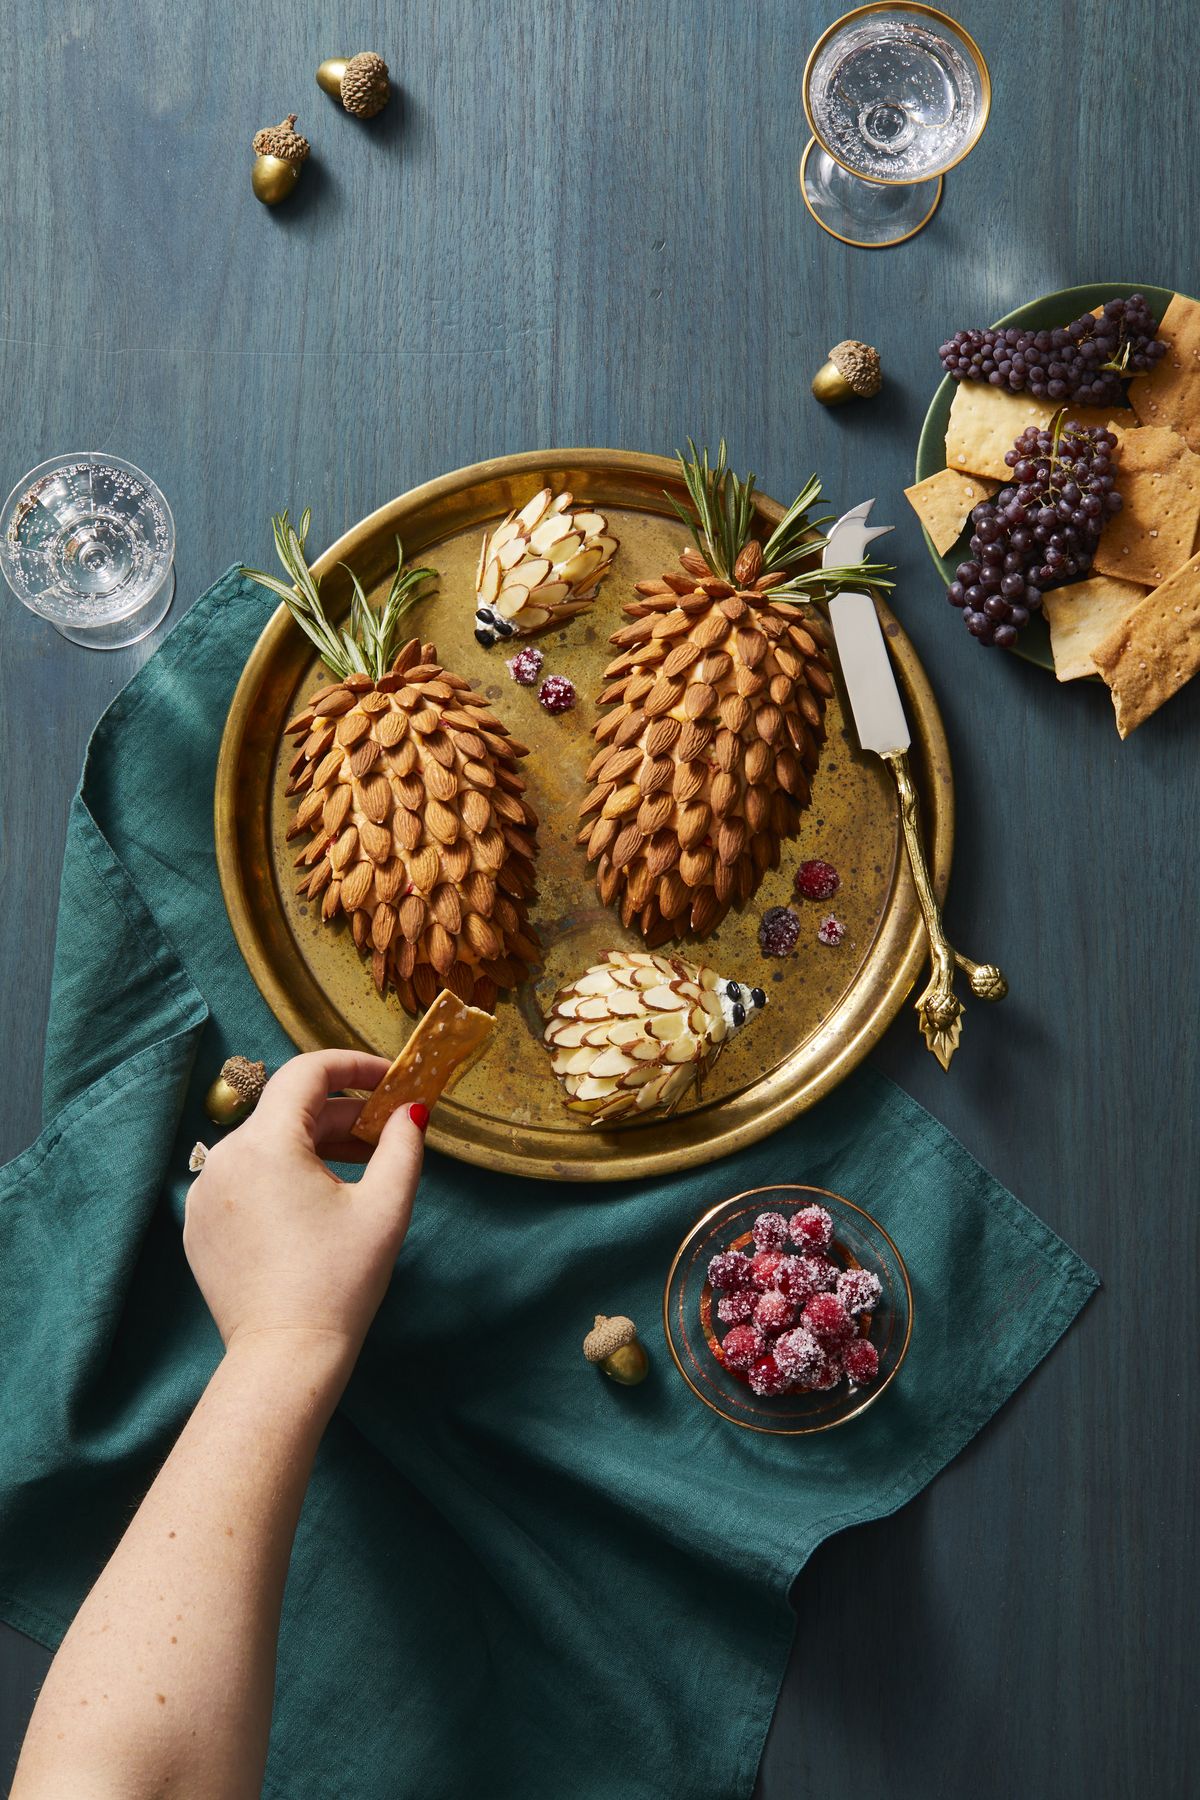 cheeseballs covered with almonds to resemble pinecones and hedgehogs